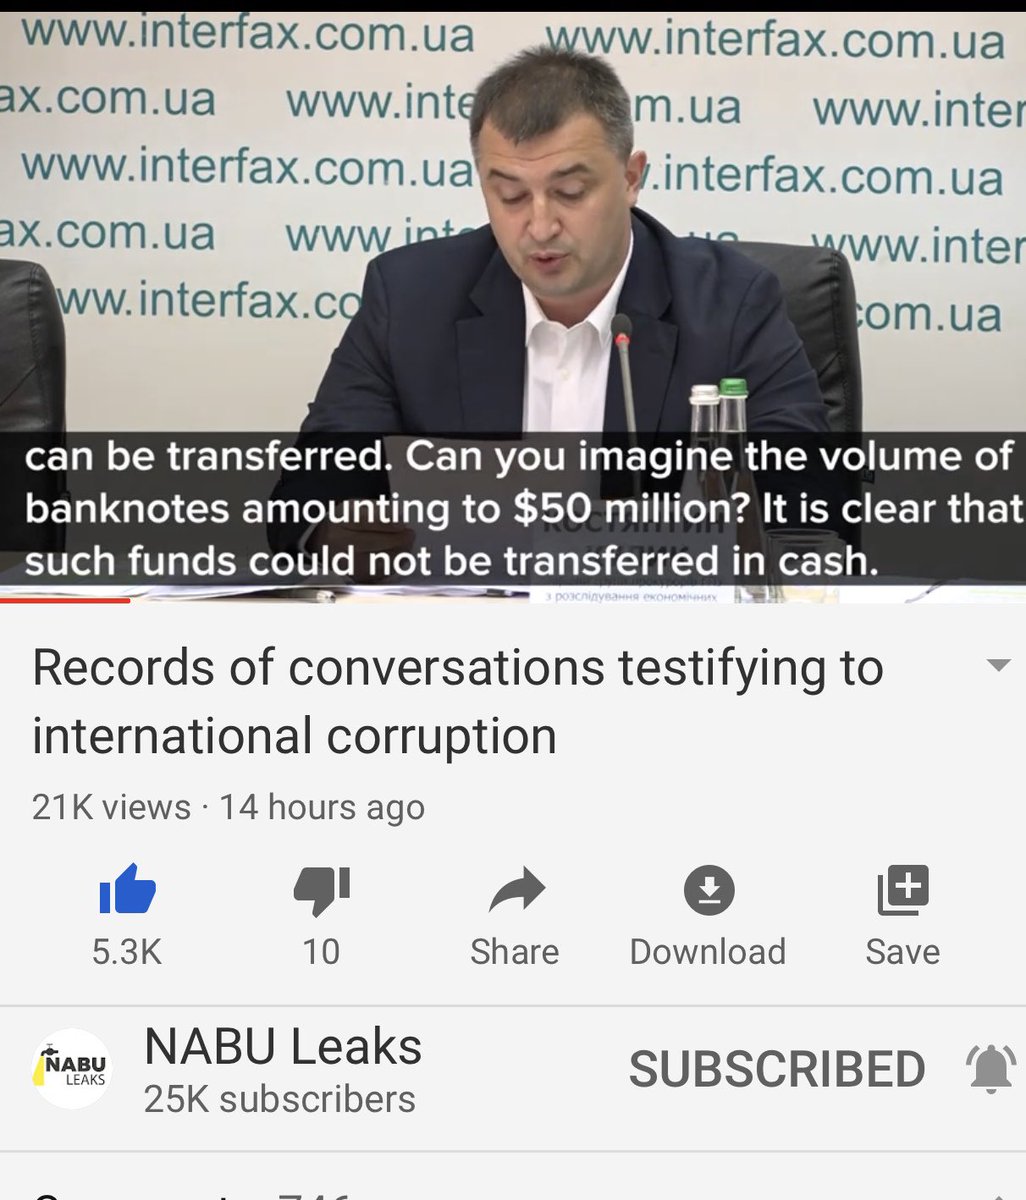 He noted that Burisma were ready to bribe with 50 mil but he needed to understand how they were doing it and so they had to ask the Ukrainian Security Service to help